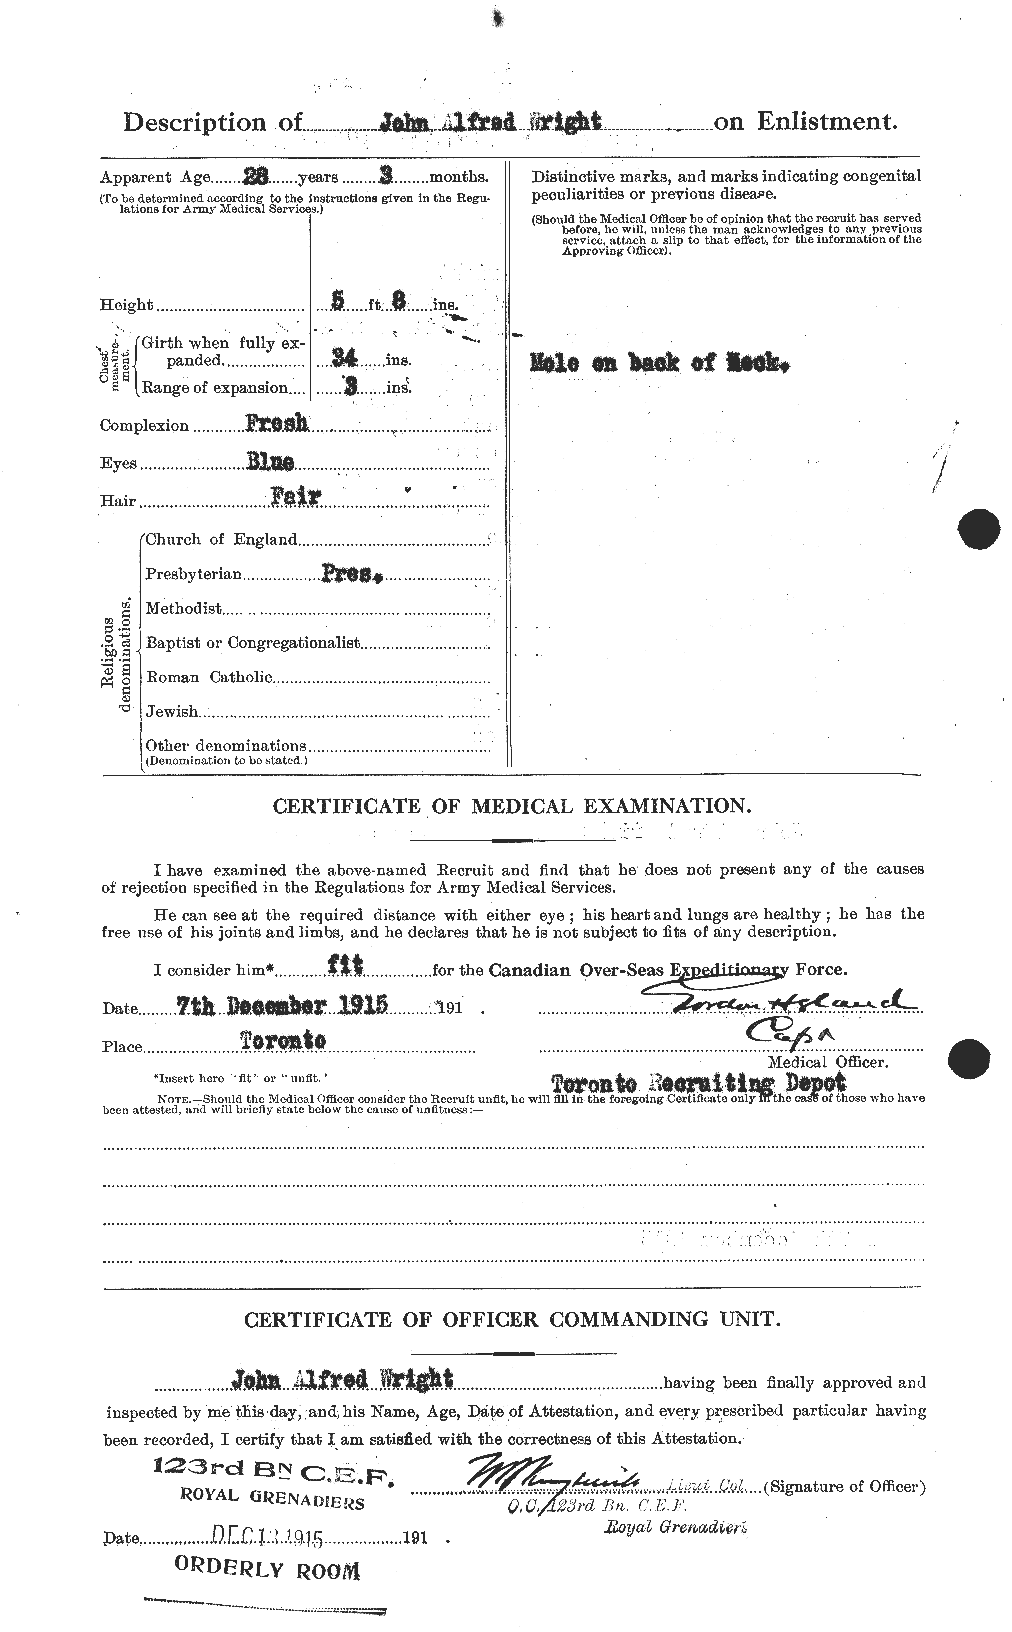 Personnel Records of the First World War - CEF 687079b